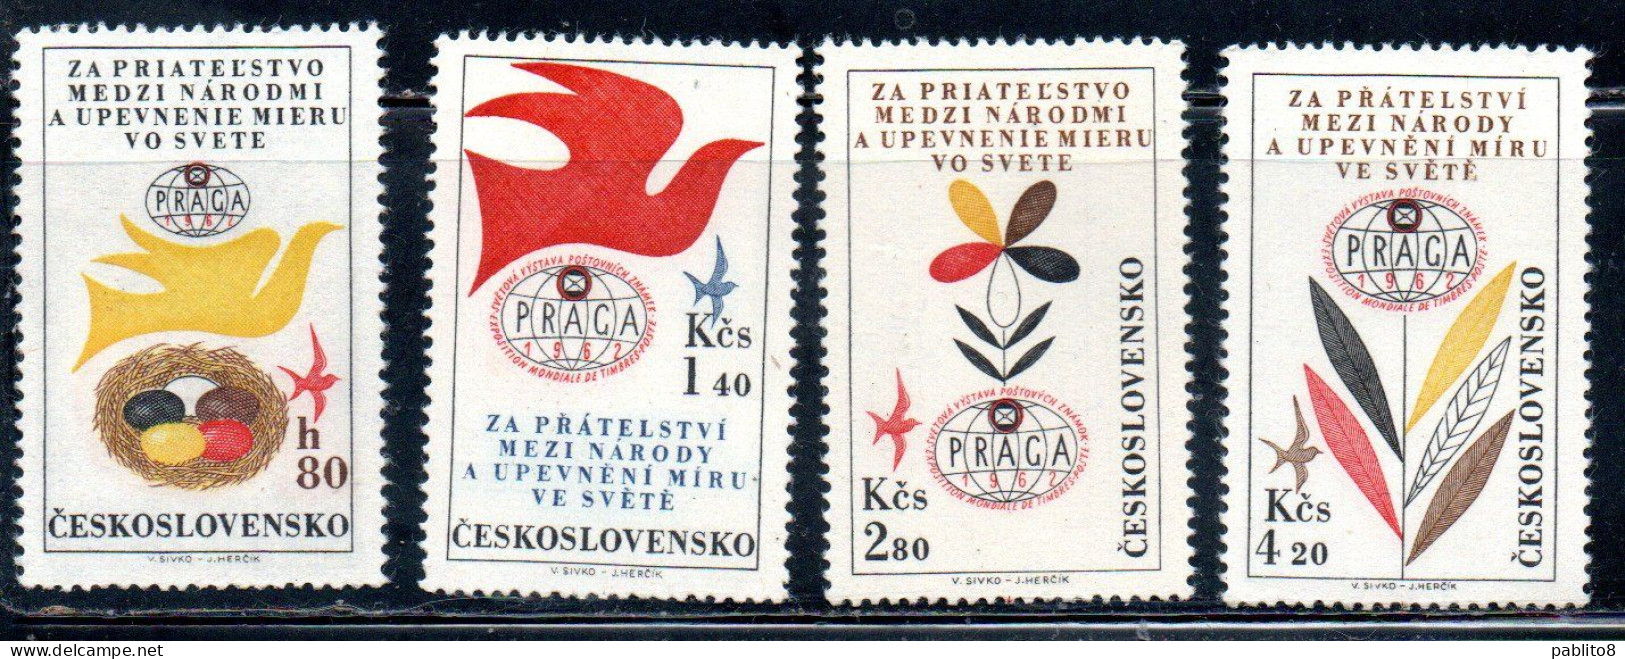 CZECHOSLOVAKIA CECOSLOVACCHIA 1962 AIR POST MAIL AIRMAIL PRAGA 62 WORLD EXHIBITION POSTAGE STAMPS COMPLETE SET SERIE MNH - Luftpost